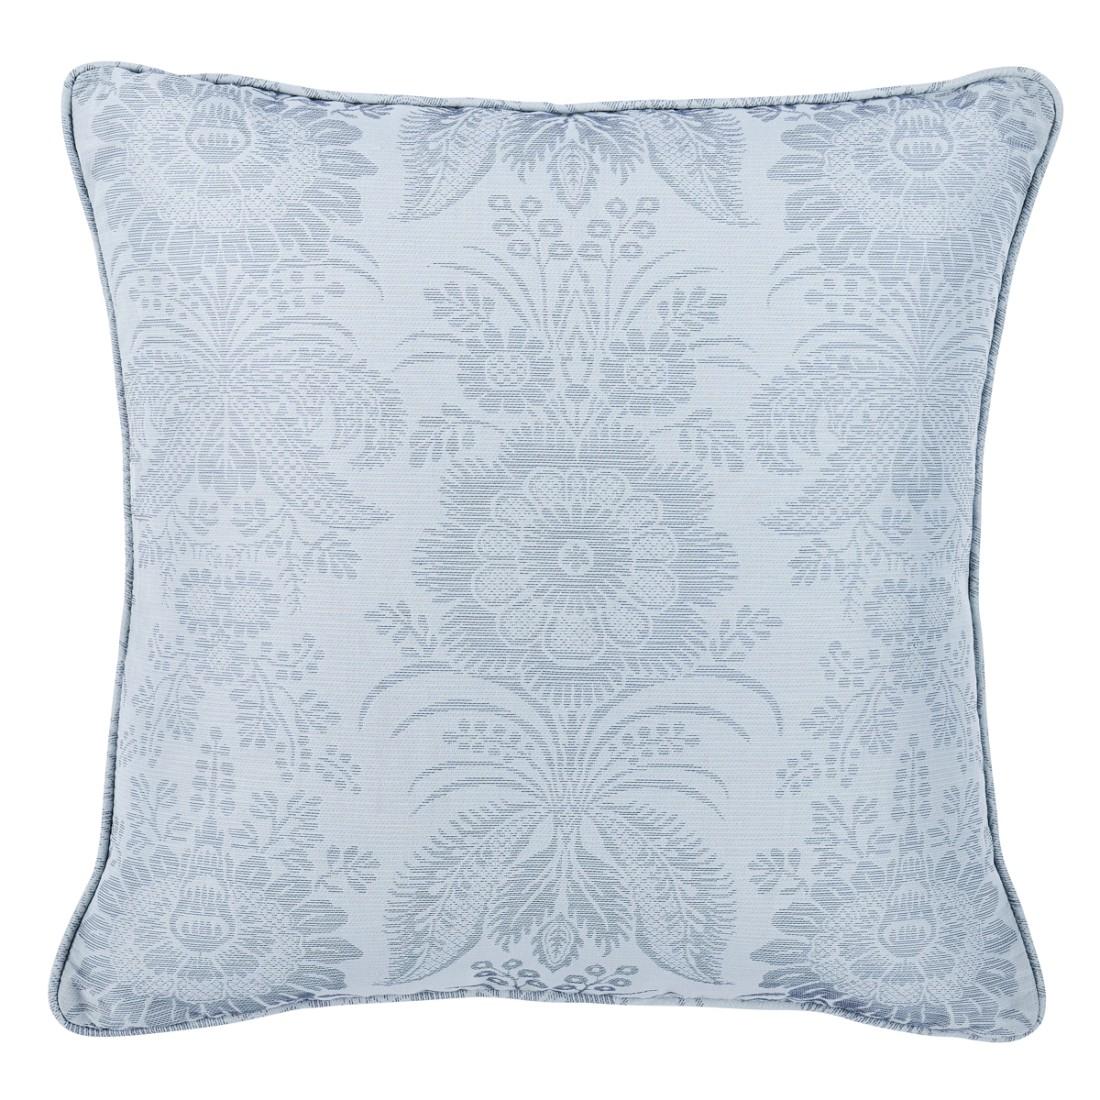 This pillow features Greta with a self-welt finish. A beautiful mid-scale floral with the look of a damask, Greta has an elevated mirrored motif that’s tempered by an easygoing cotton-and-linen-blend fabric. The monochromatic pattern is easy to lay